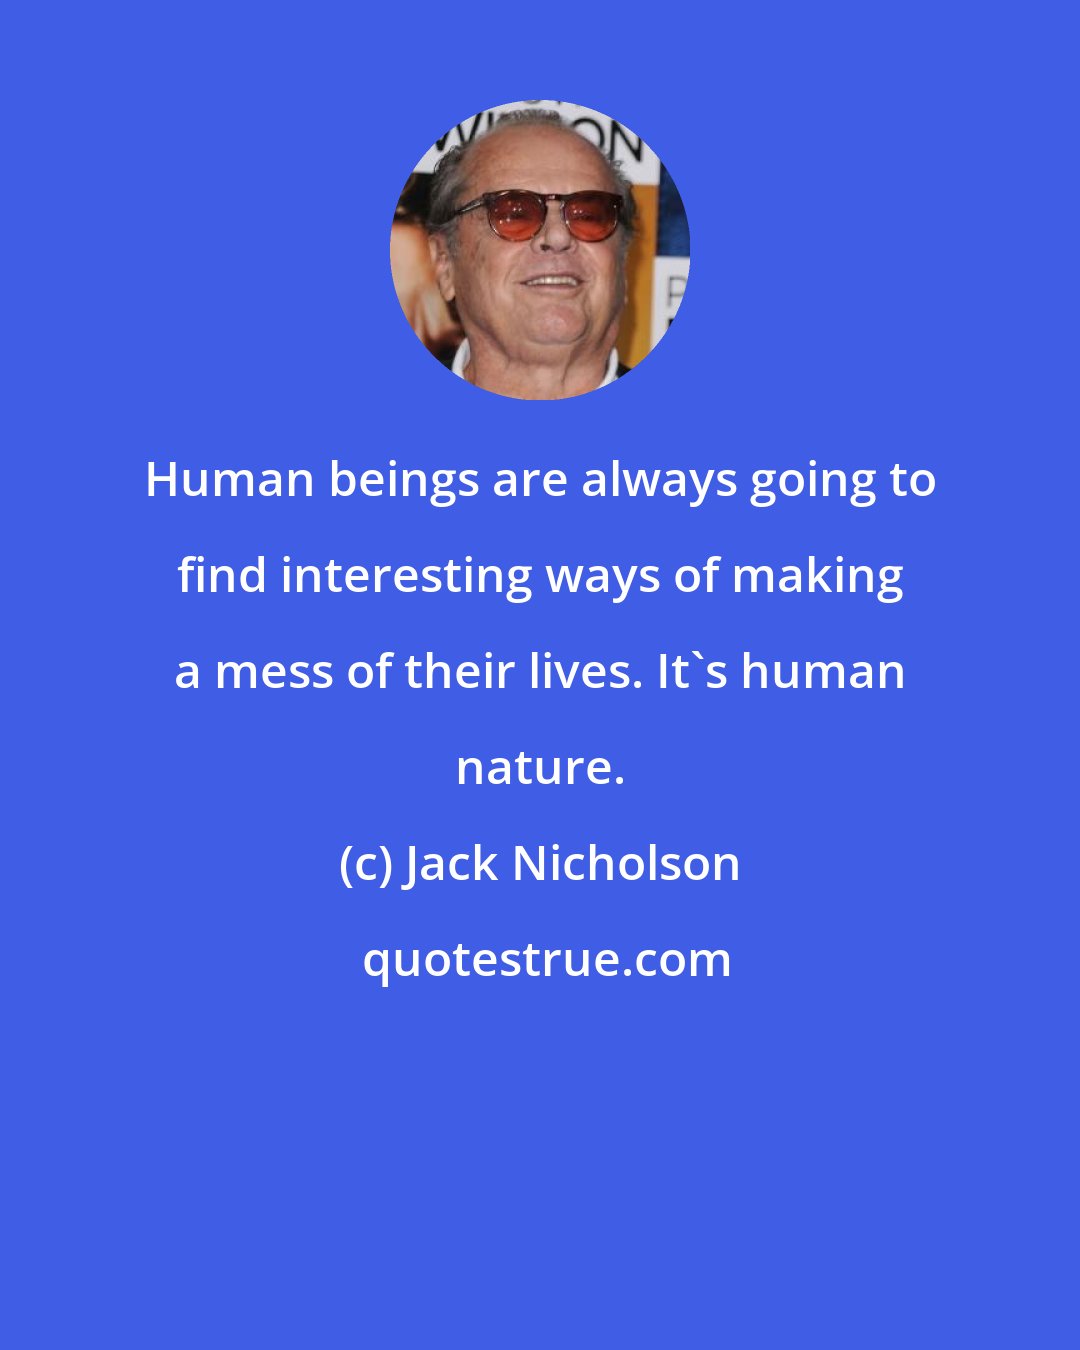 Jack Nicholson: Human beings are always going to find interesting ways of making a mess of their lives. It's human nature.